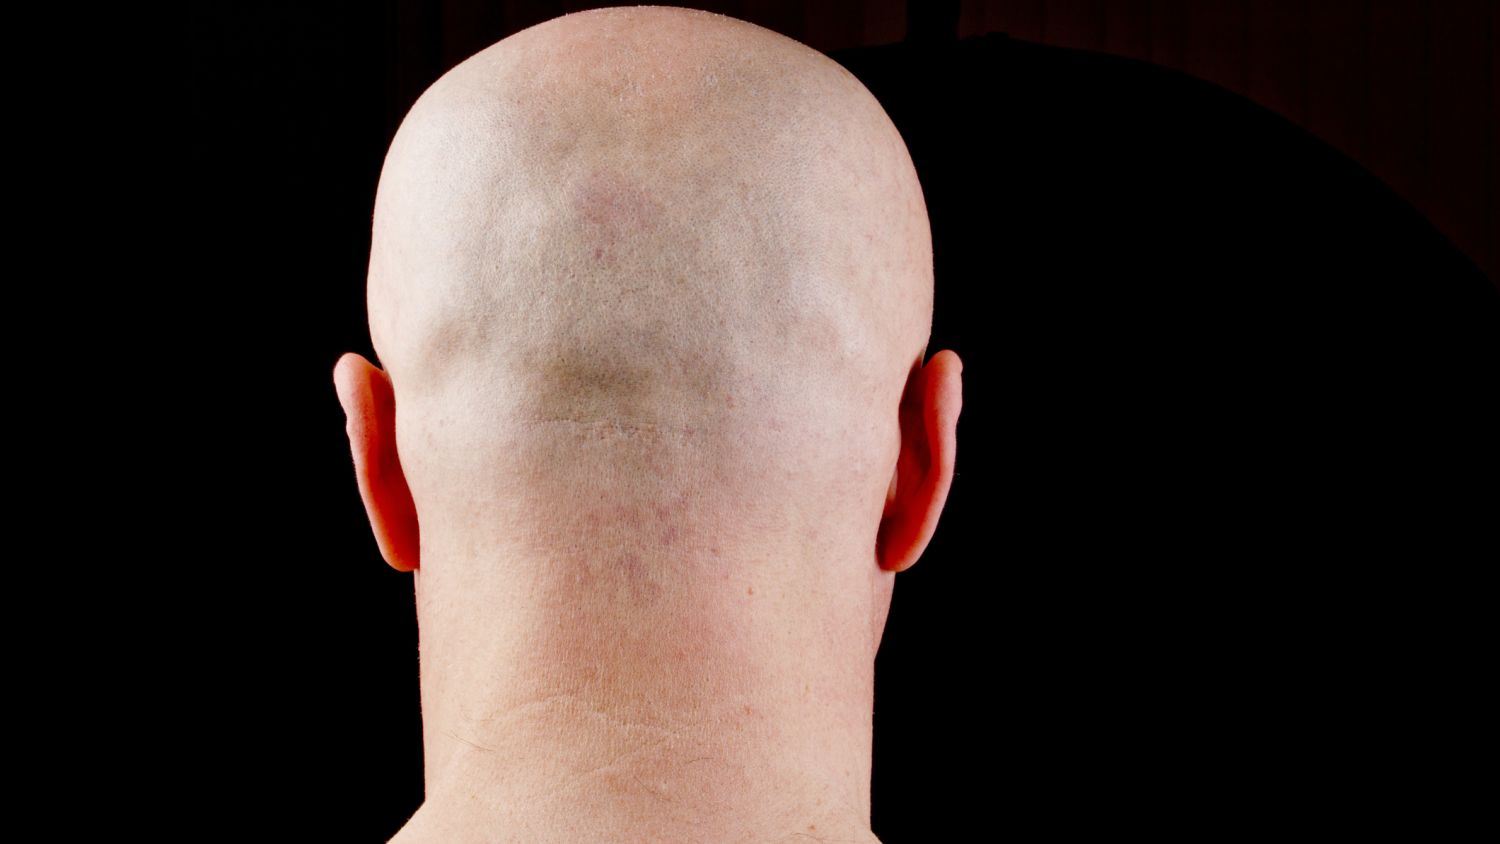 A bald man's head from the back (Image: Dreamstime)